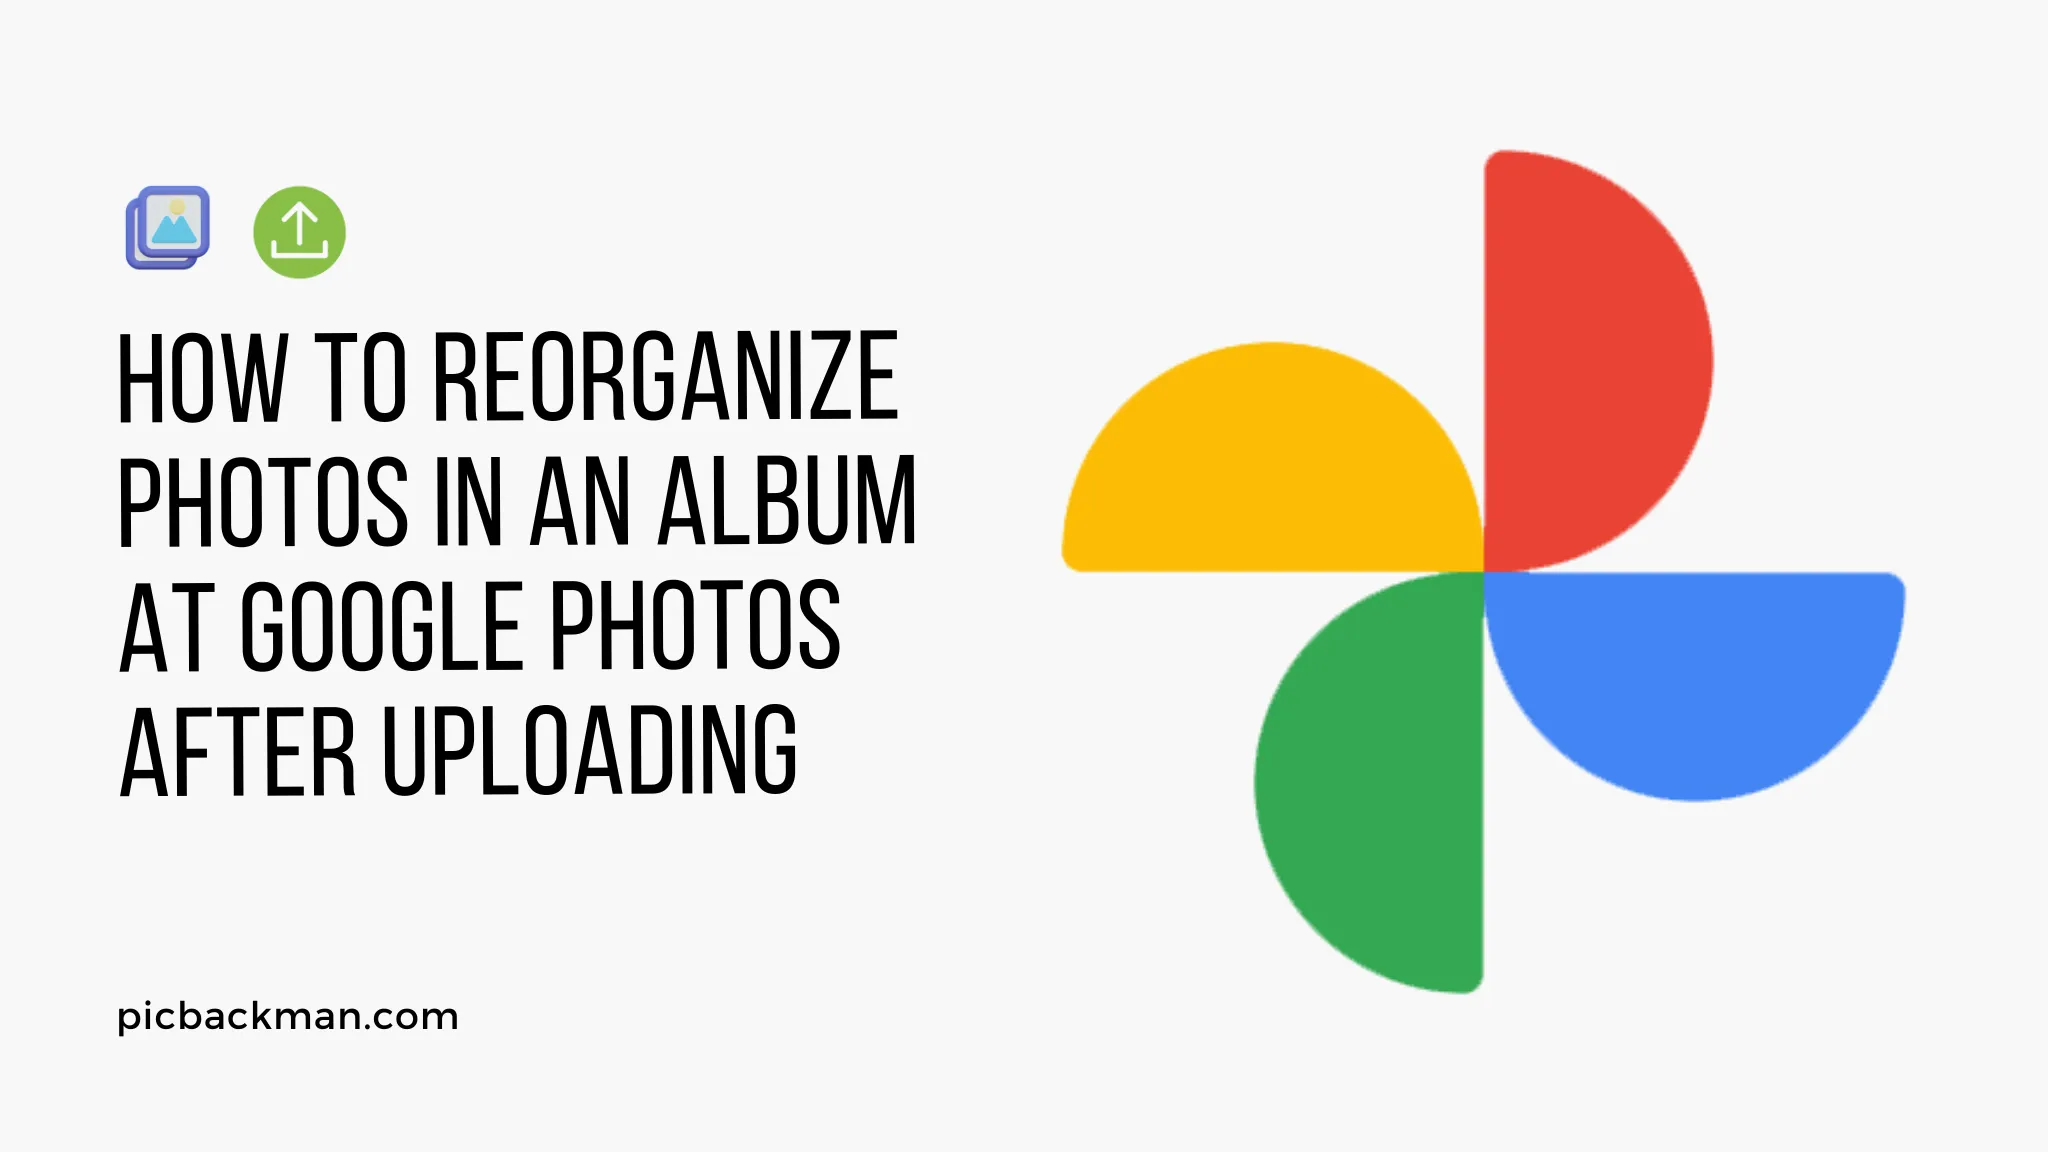 How to reorganize photos in an album at Google Photos after uploading